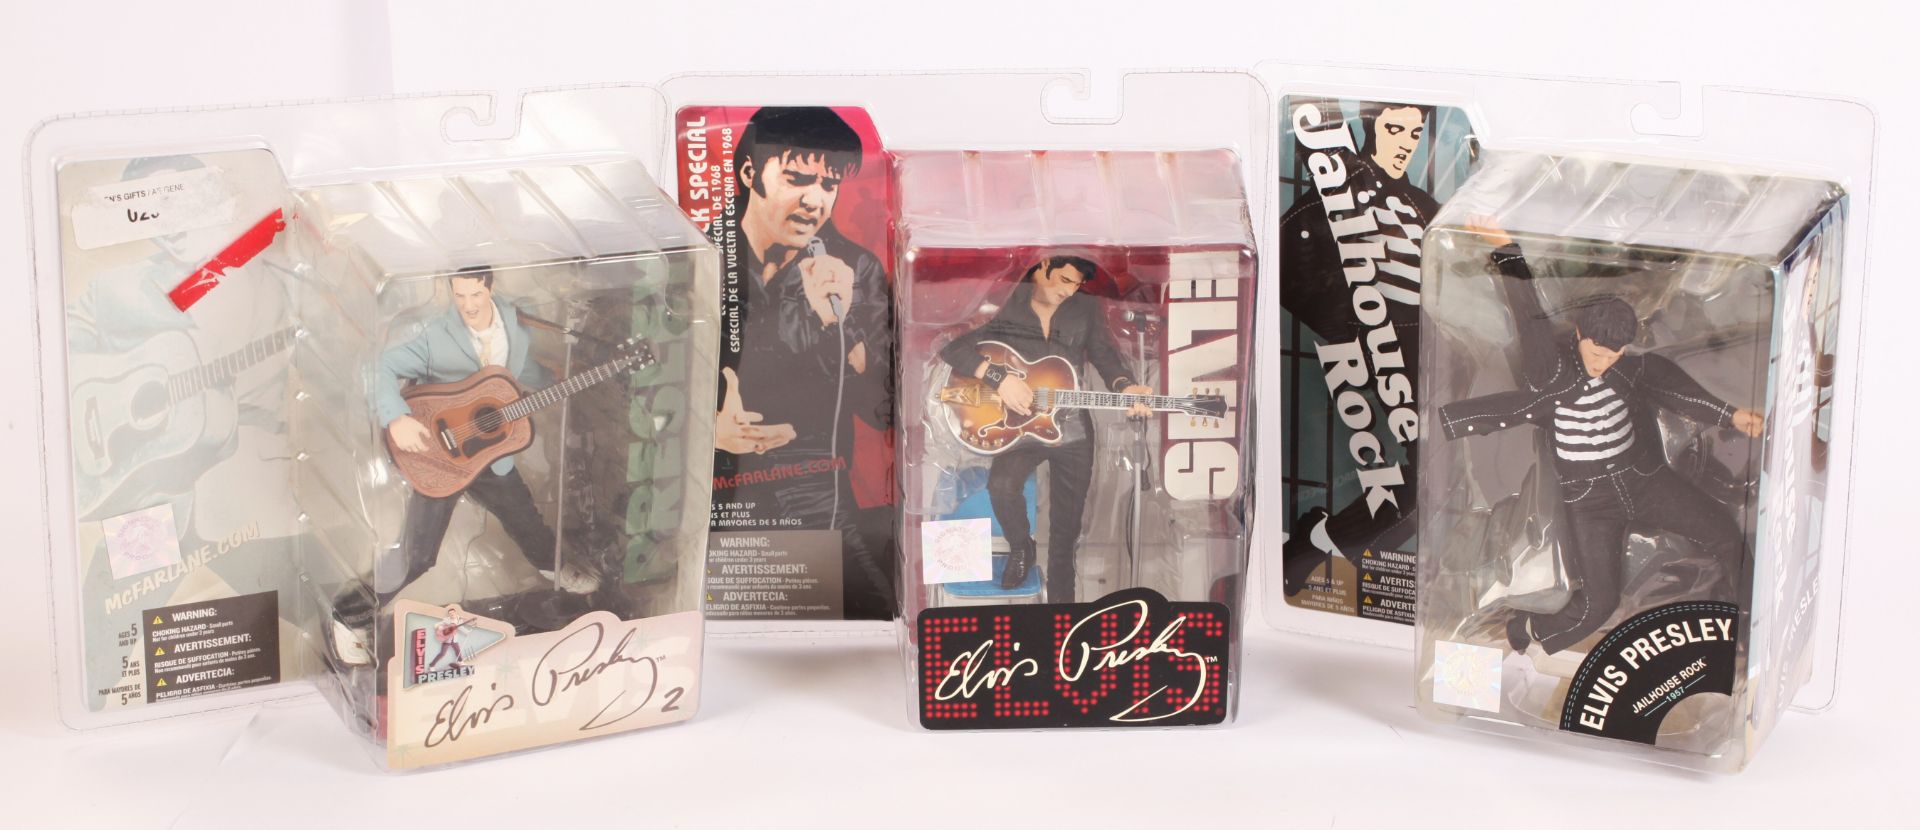 Elvis Presley Telephone, Figures, Watches and A Mug - Image 3 of 3